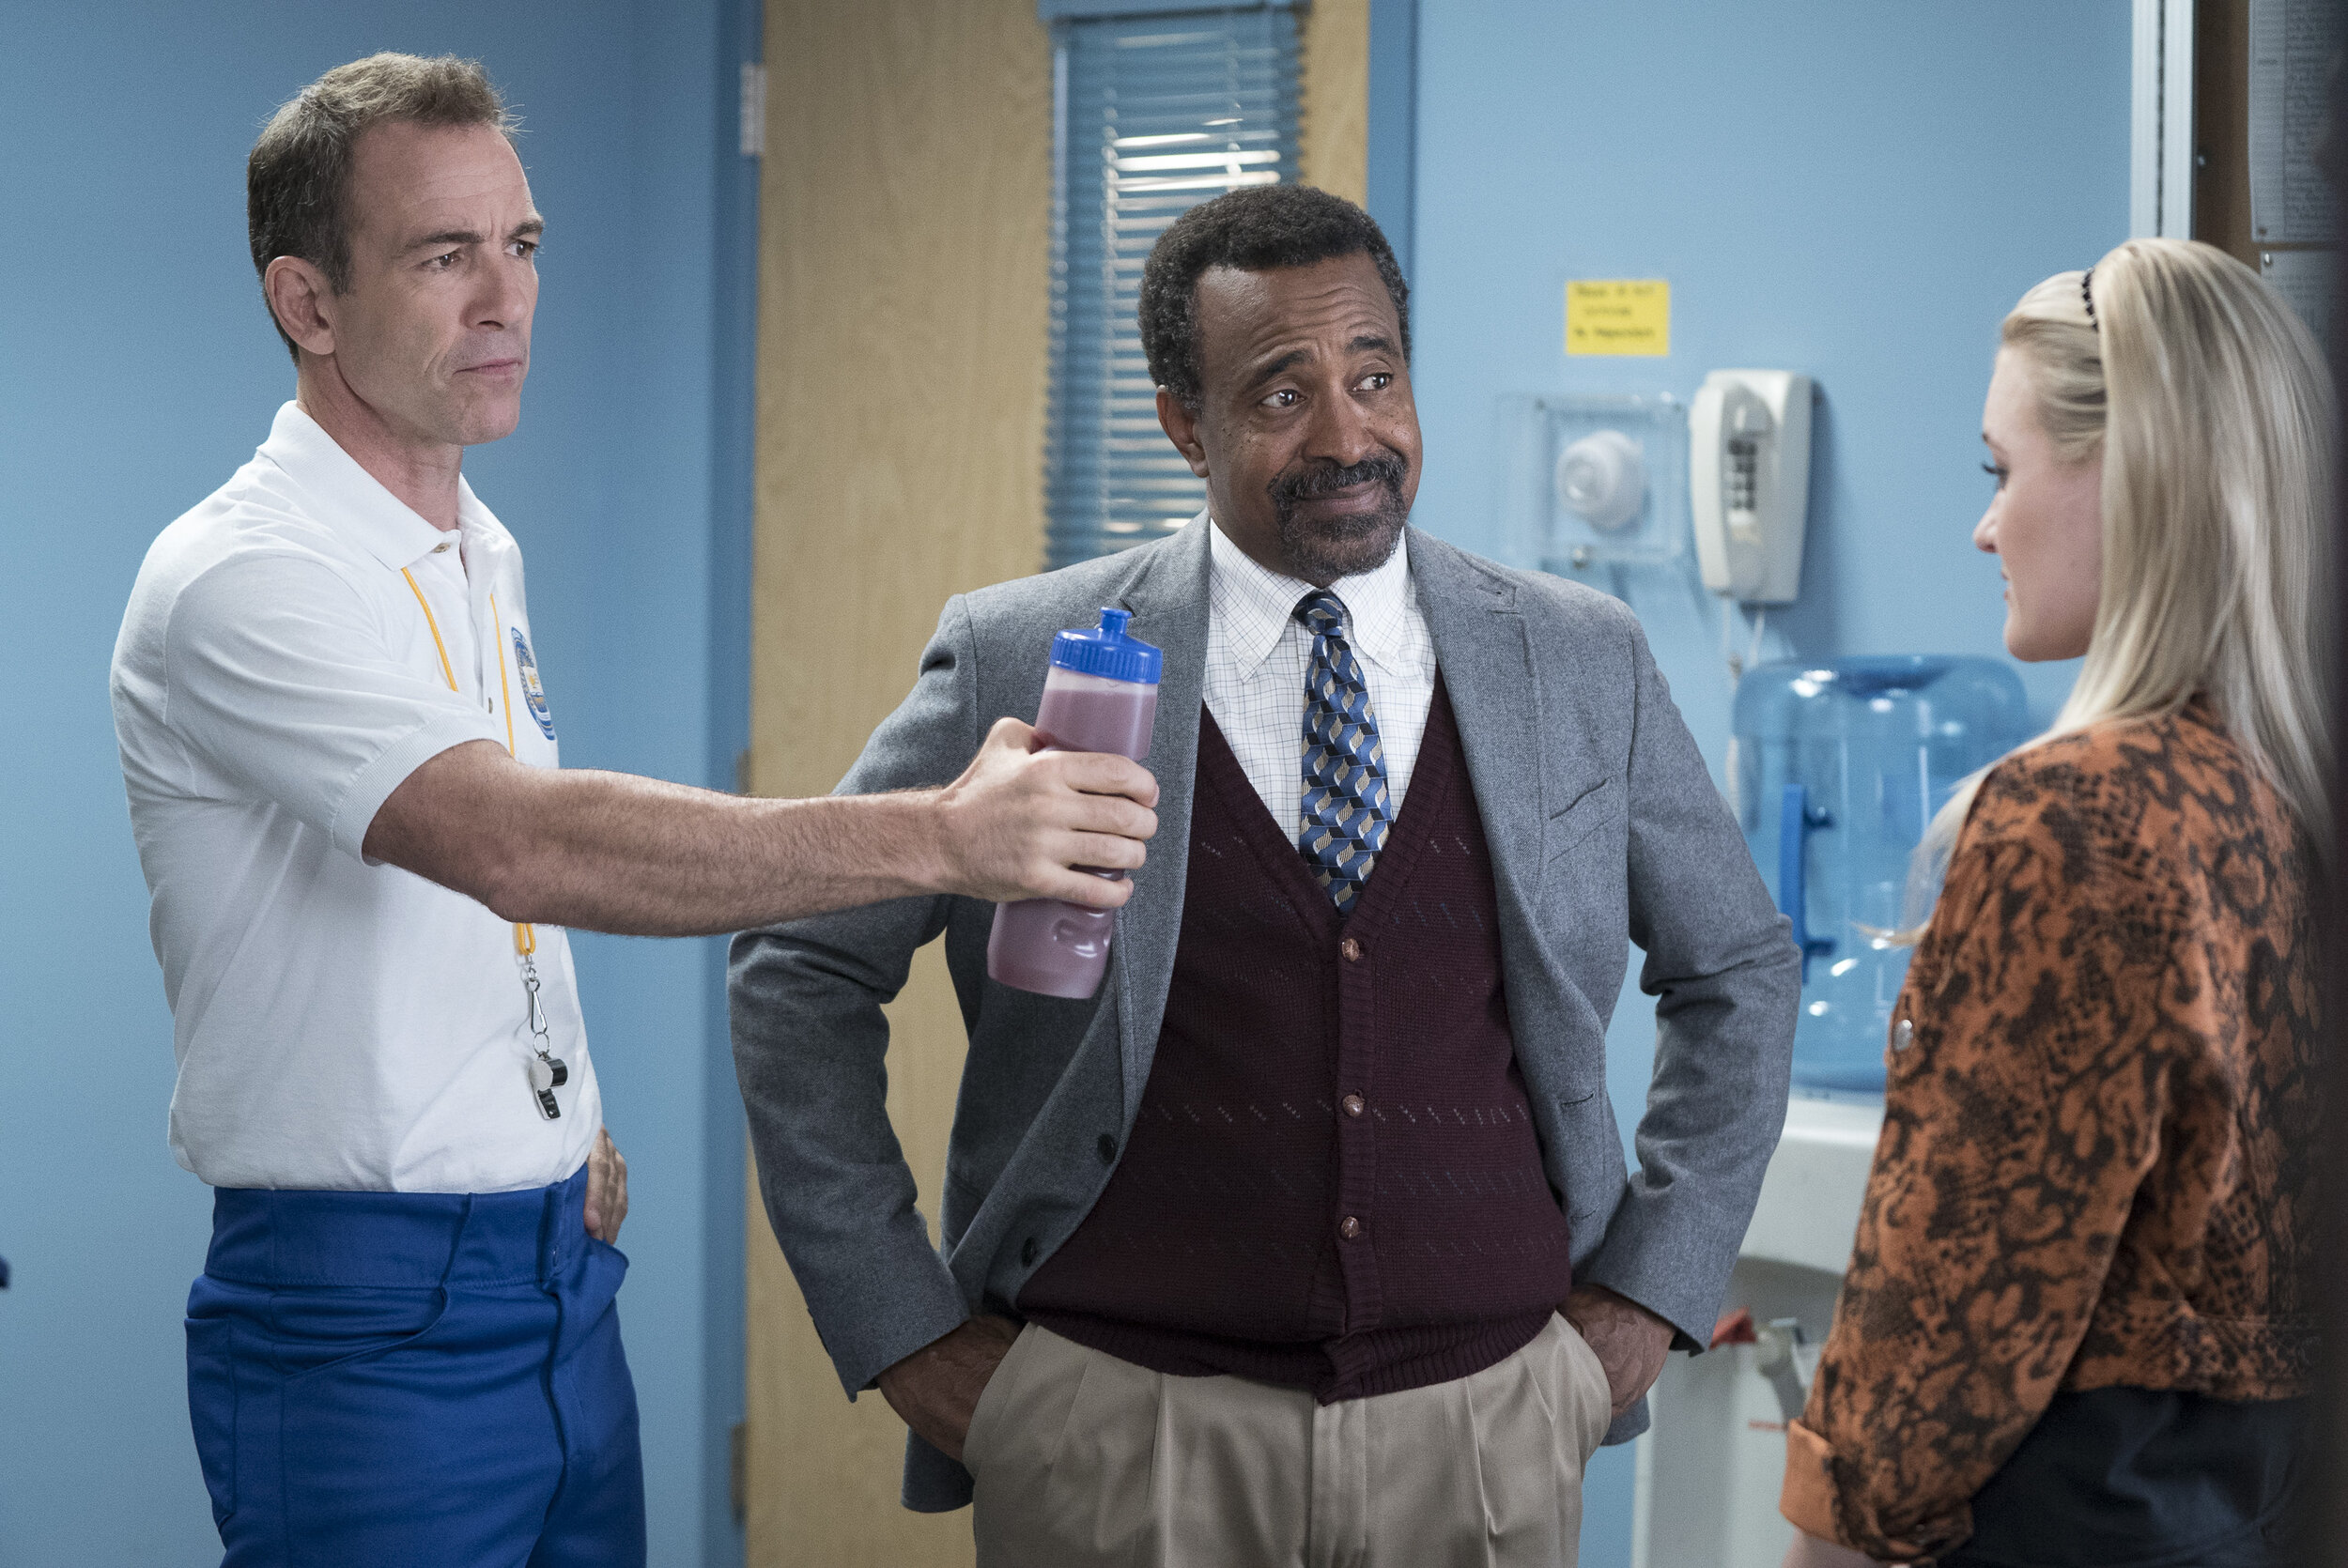 On set of ‘Schooled’ (from left): Bryan Callen as Coach Mellor, Tim Meadows  as Principal Glascott and AJ Michalka as Lainey Lewis.